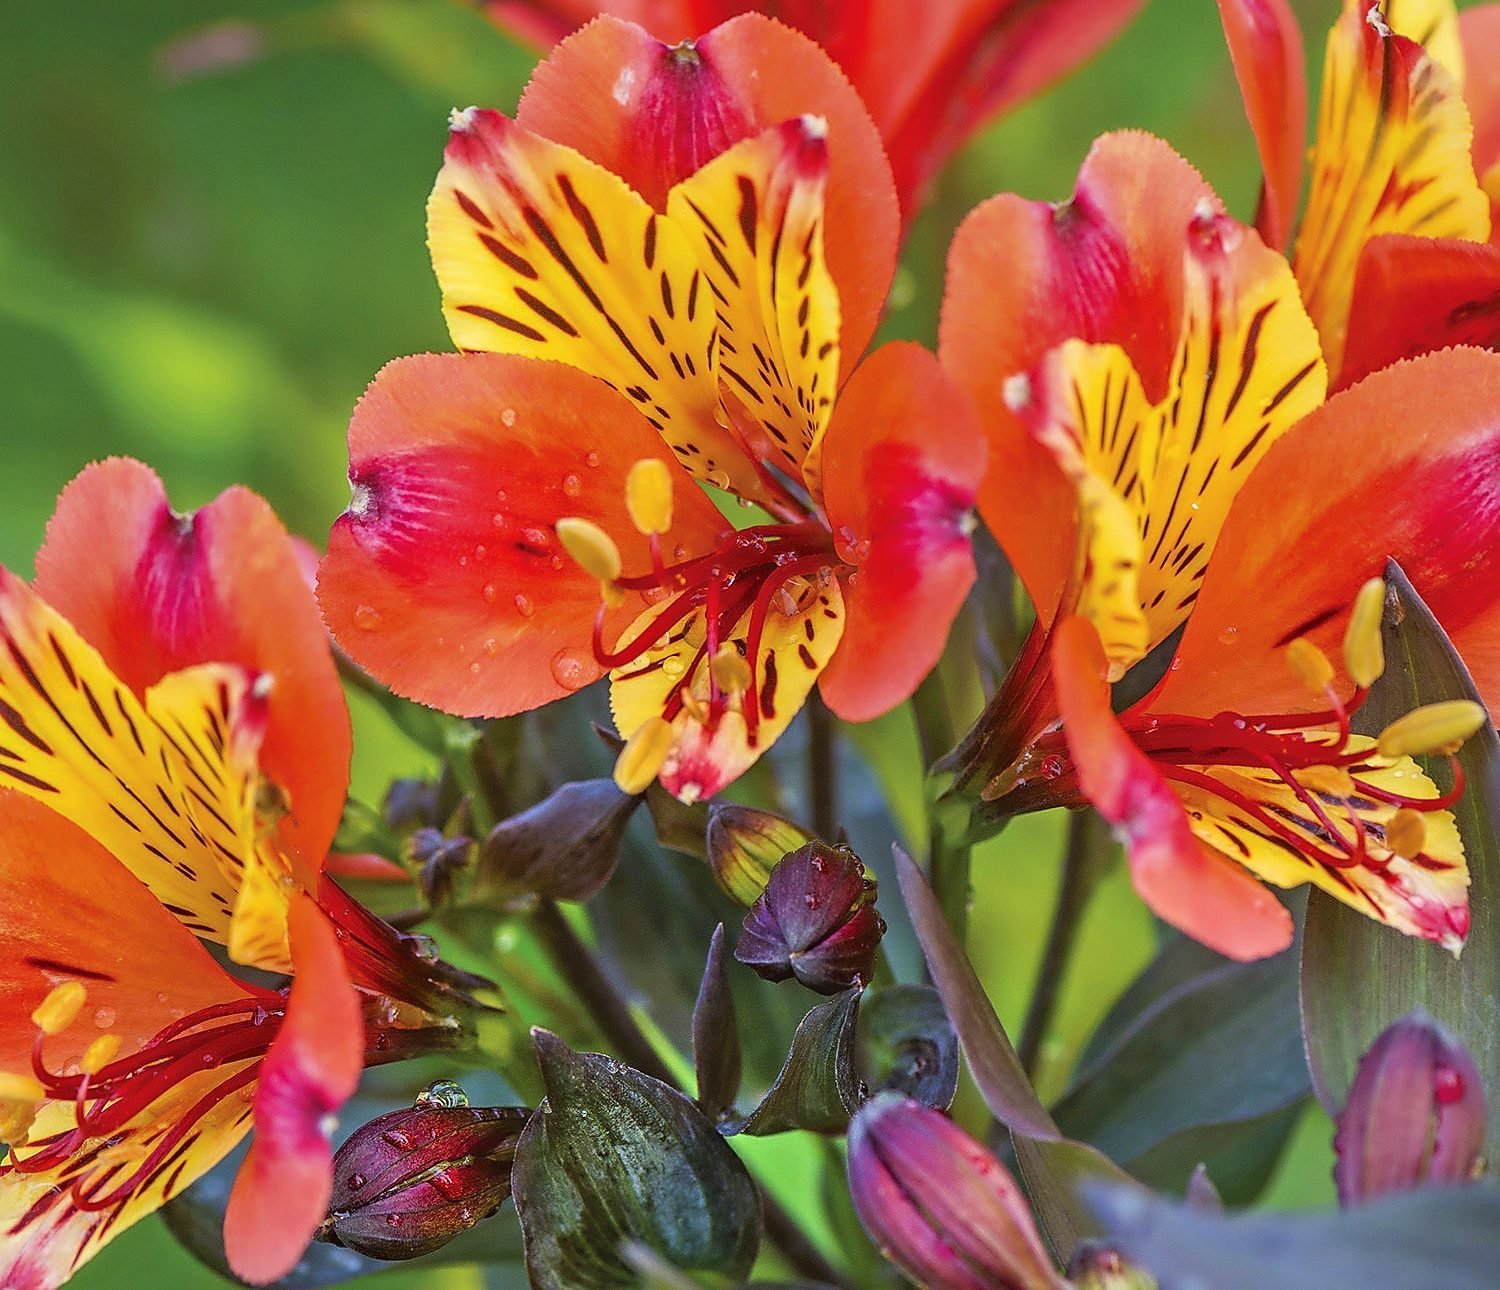 How to Grow and Care for Alstroemeria Flowers